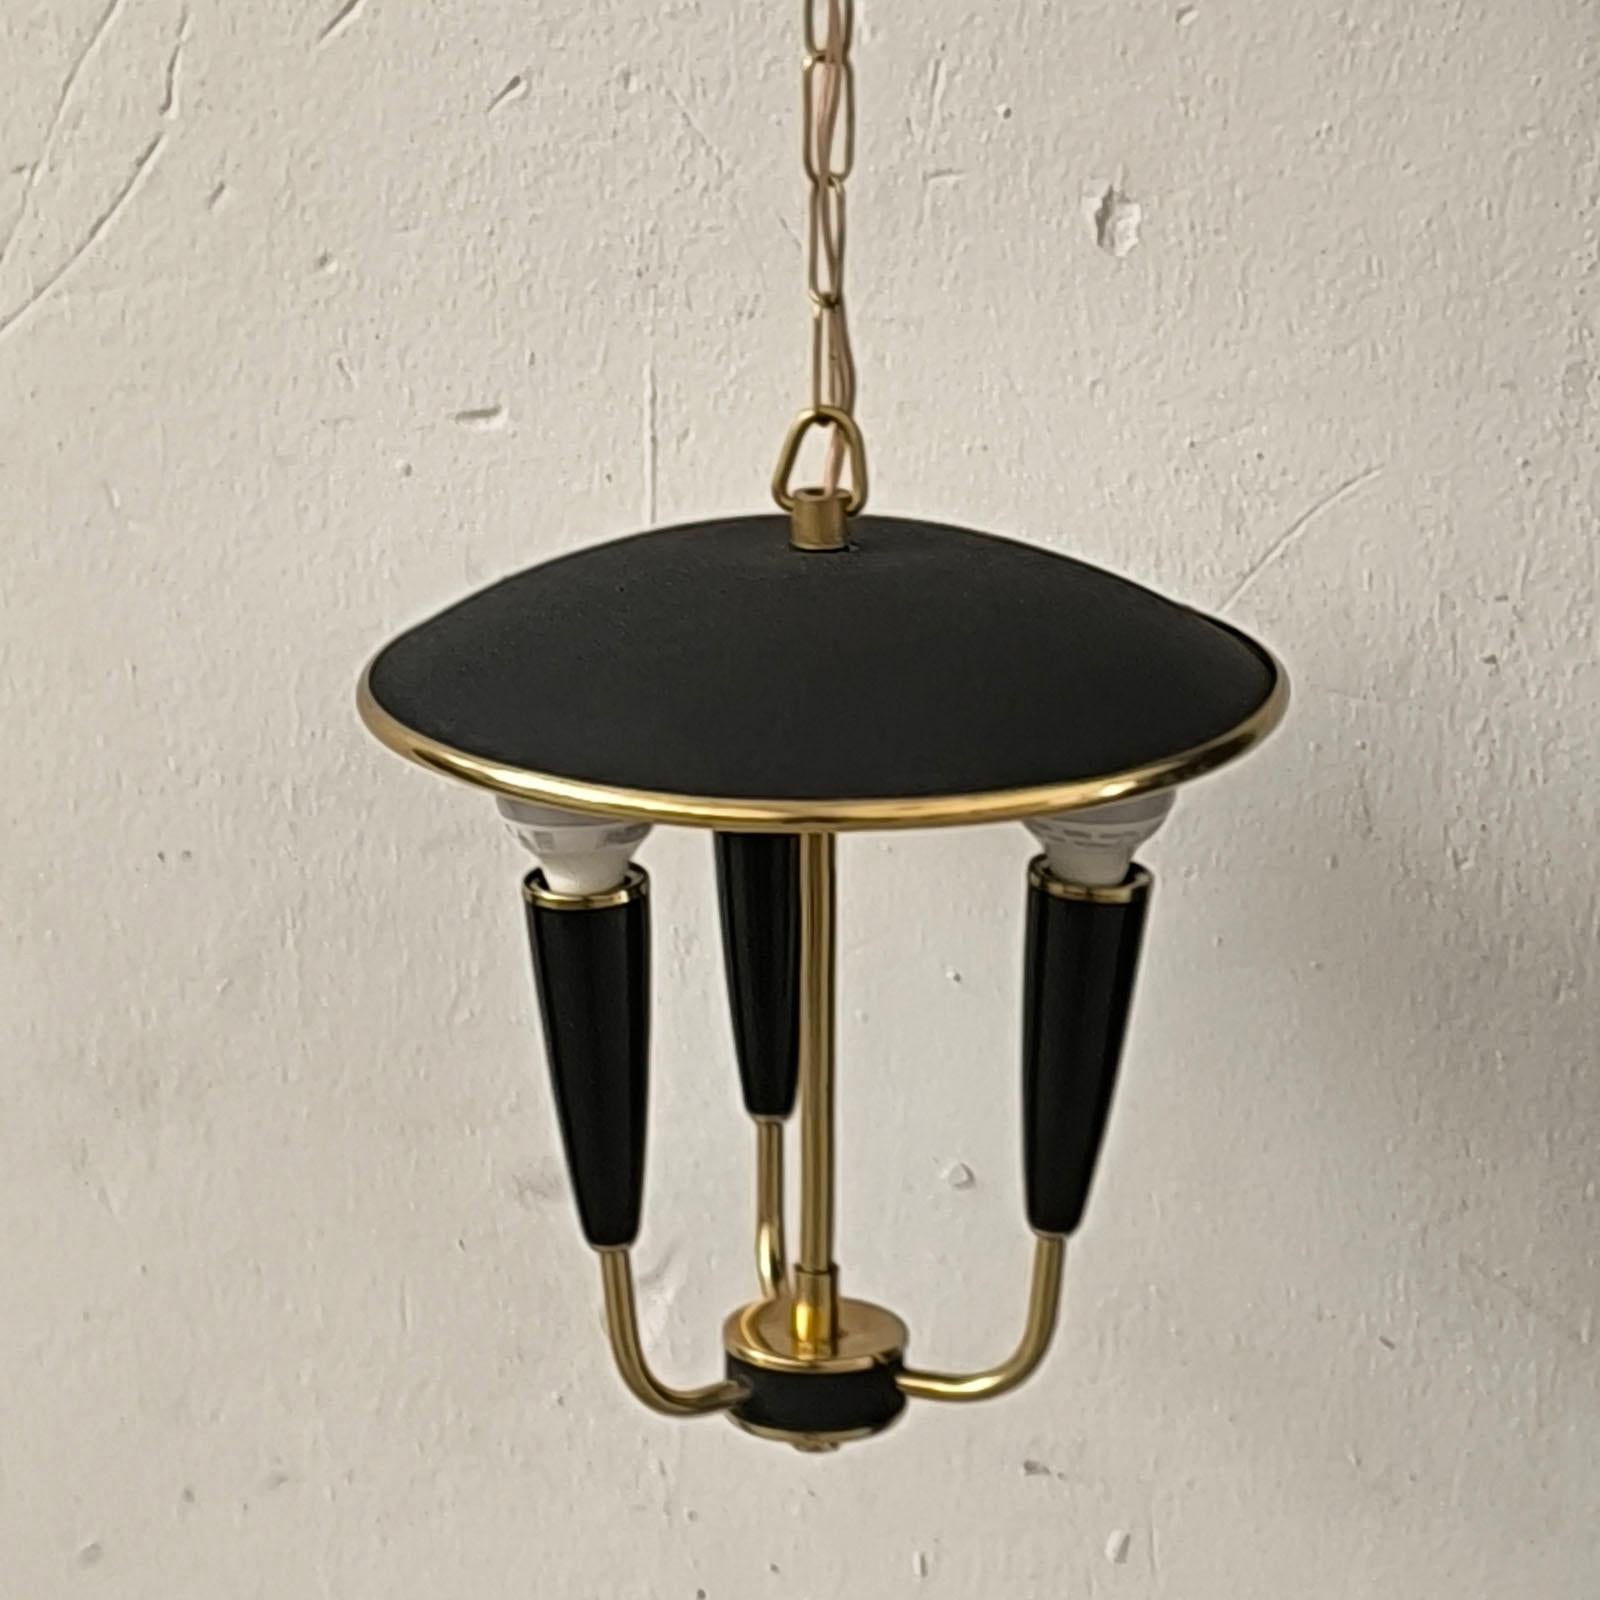 Lacquered French Mid-Century Modern Ceiling Light Attributed to Maison Lunel, 1940s For Sale